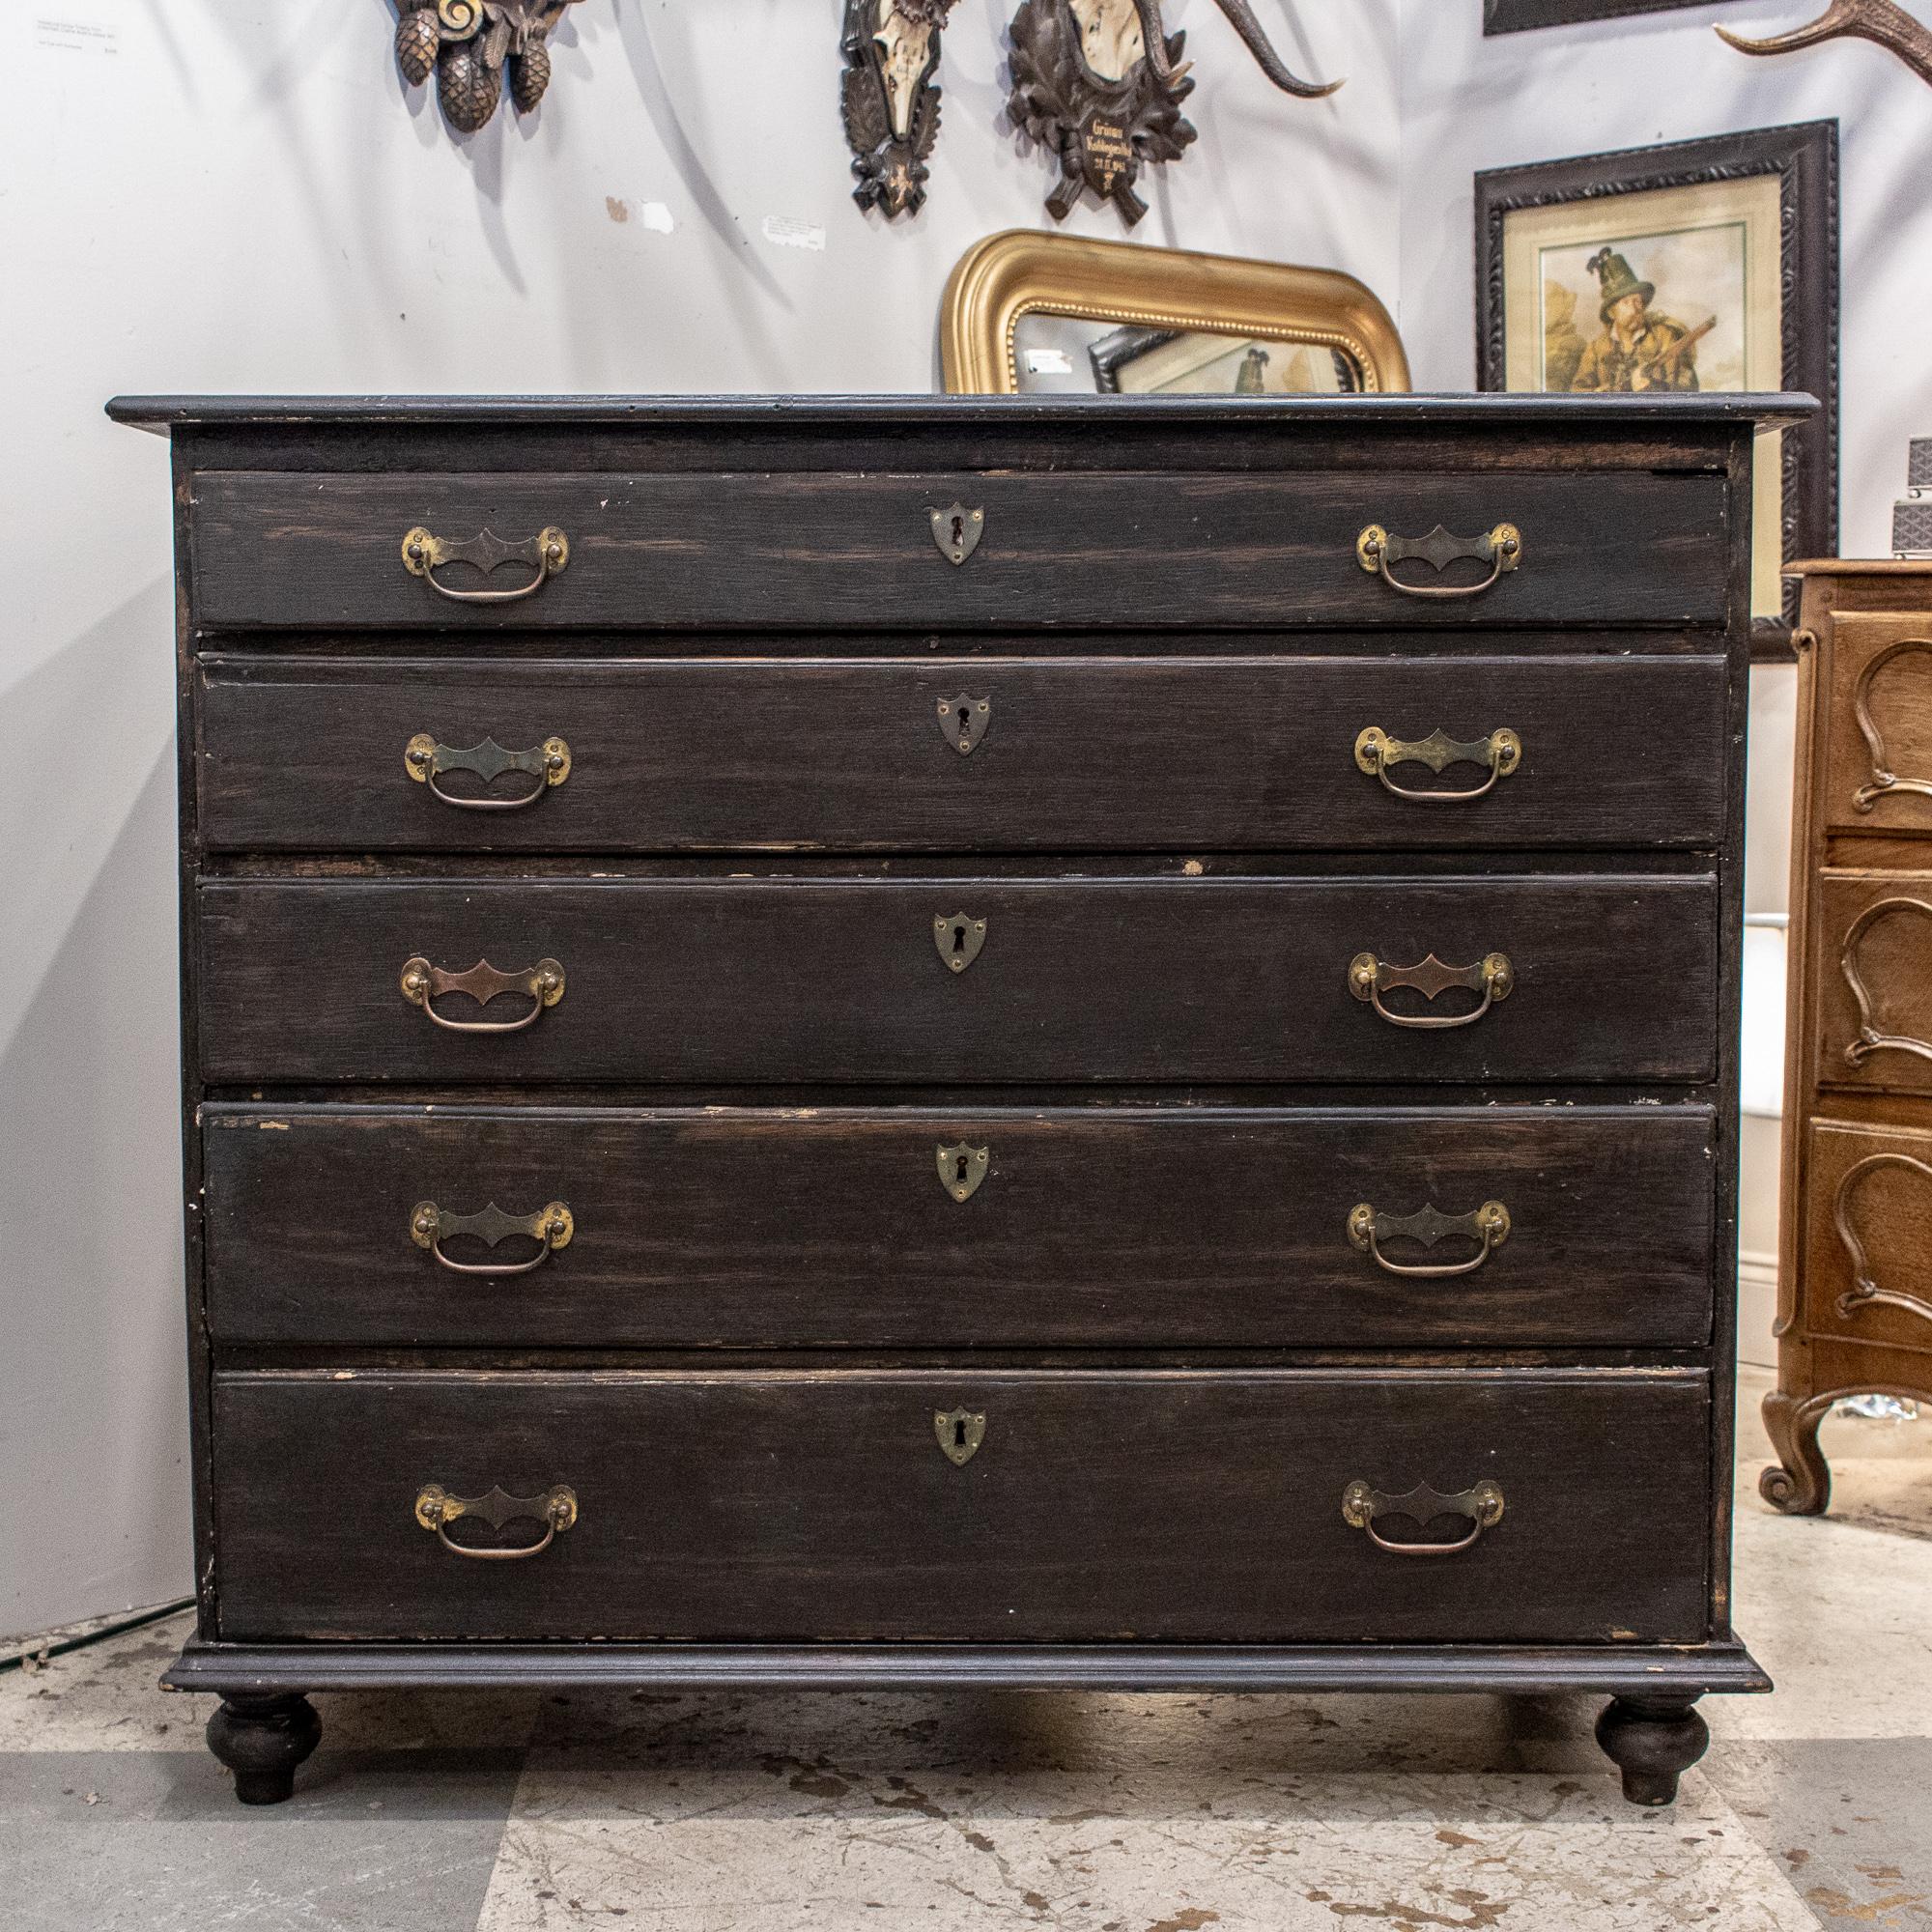 This antique French chest of drawers features a wonderful, distressed black painted finish. The color is almost an espresso or chocolate brown in artificial lighting, and more cool-toned black in natural light. You can see some of the wood finish